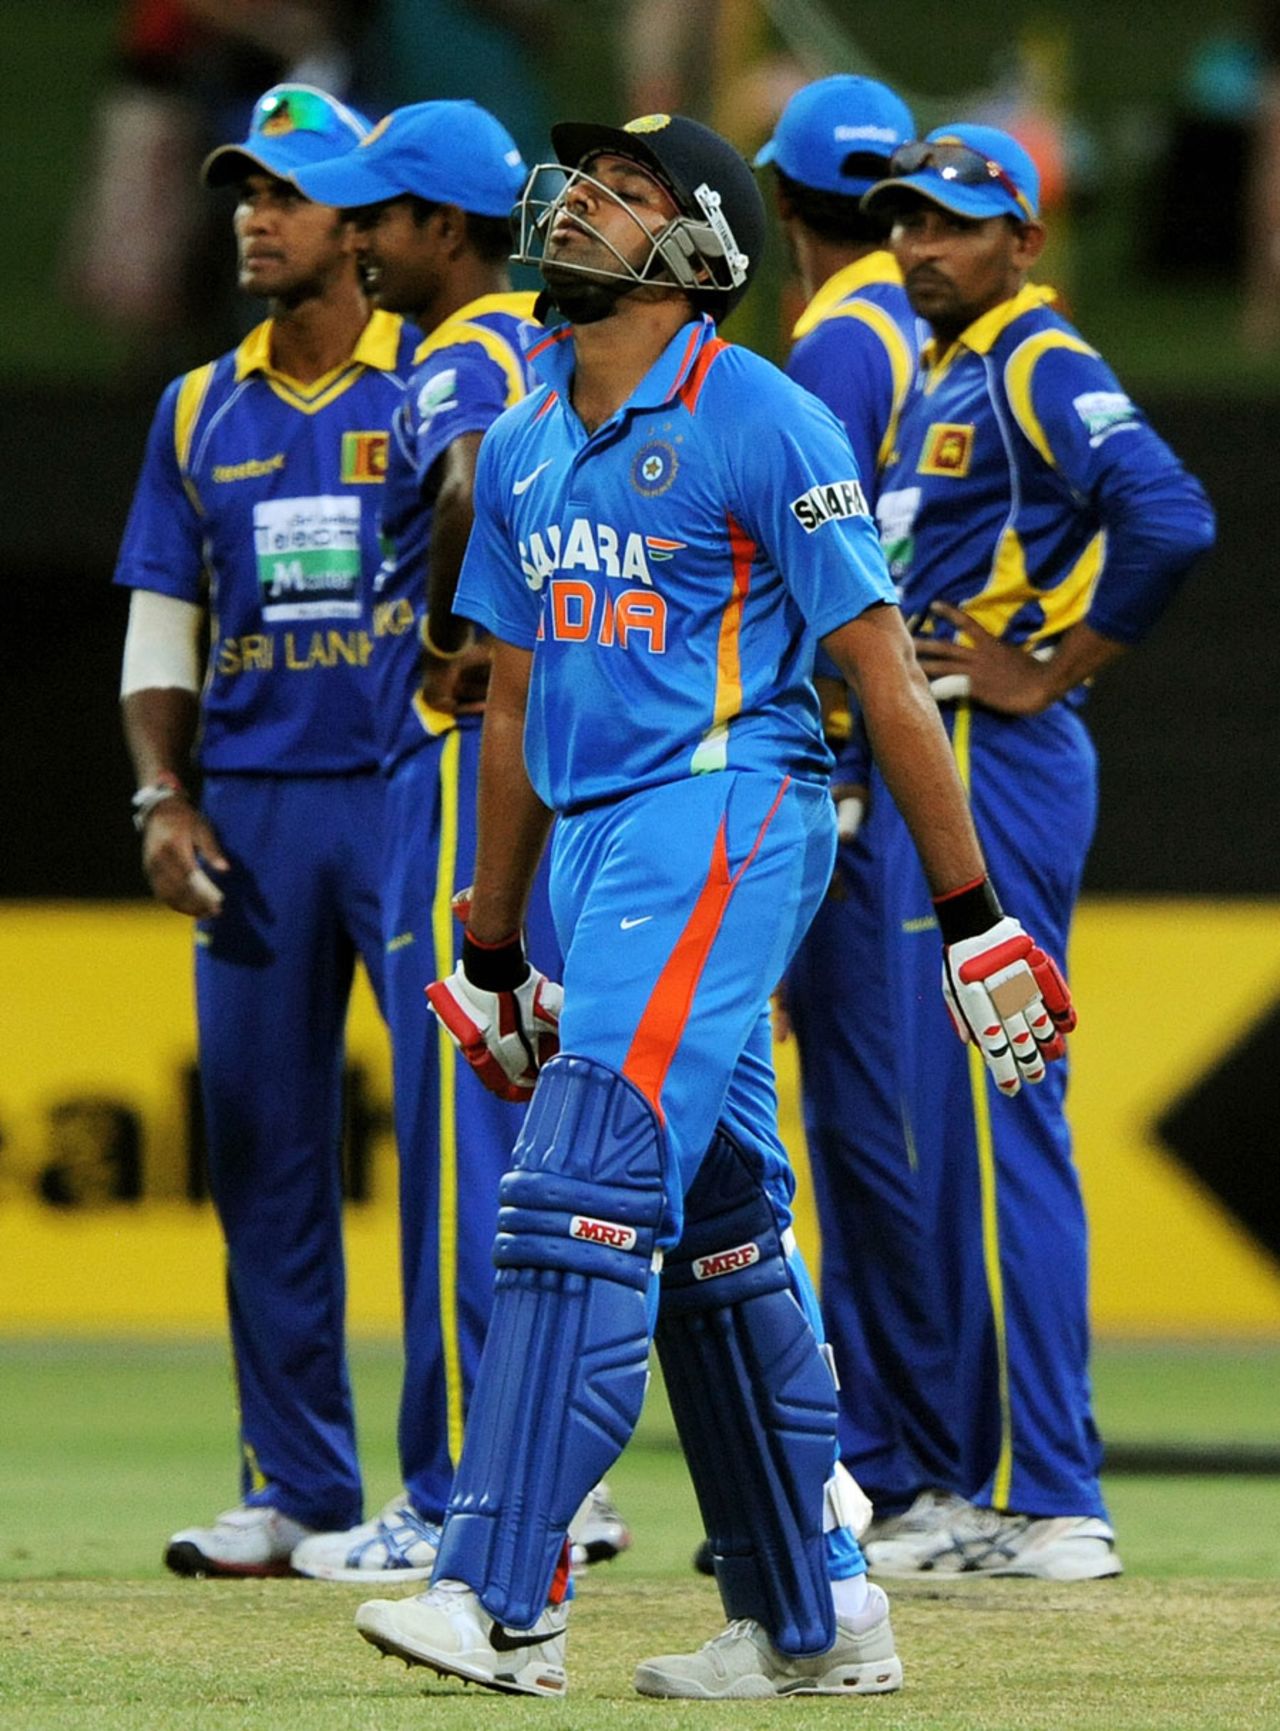 Rohit Sharma is dejected after being run out, India v Sri Lanka, Commonwealth Bank Series, Adelaide, February 14, 2012